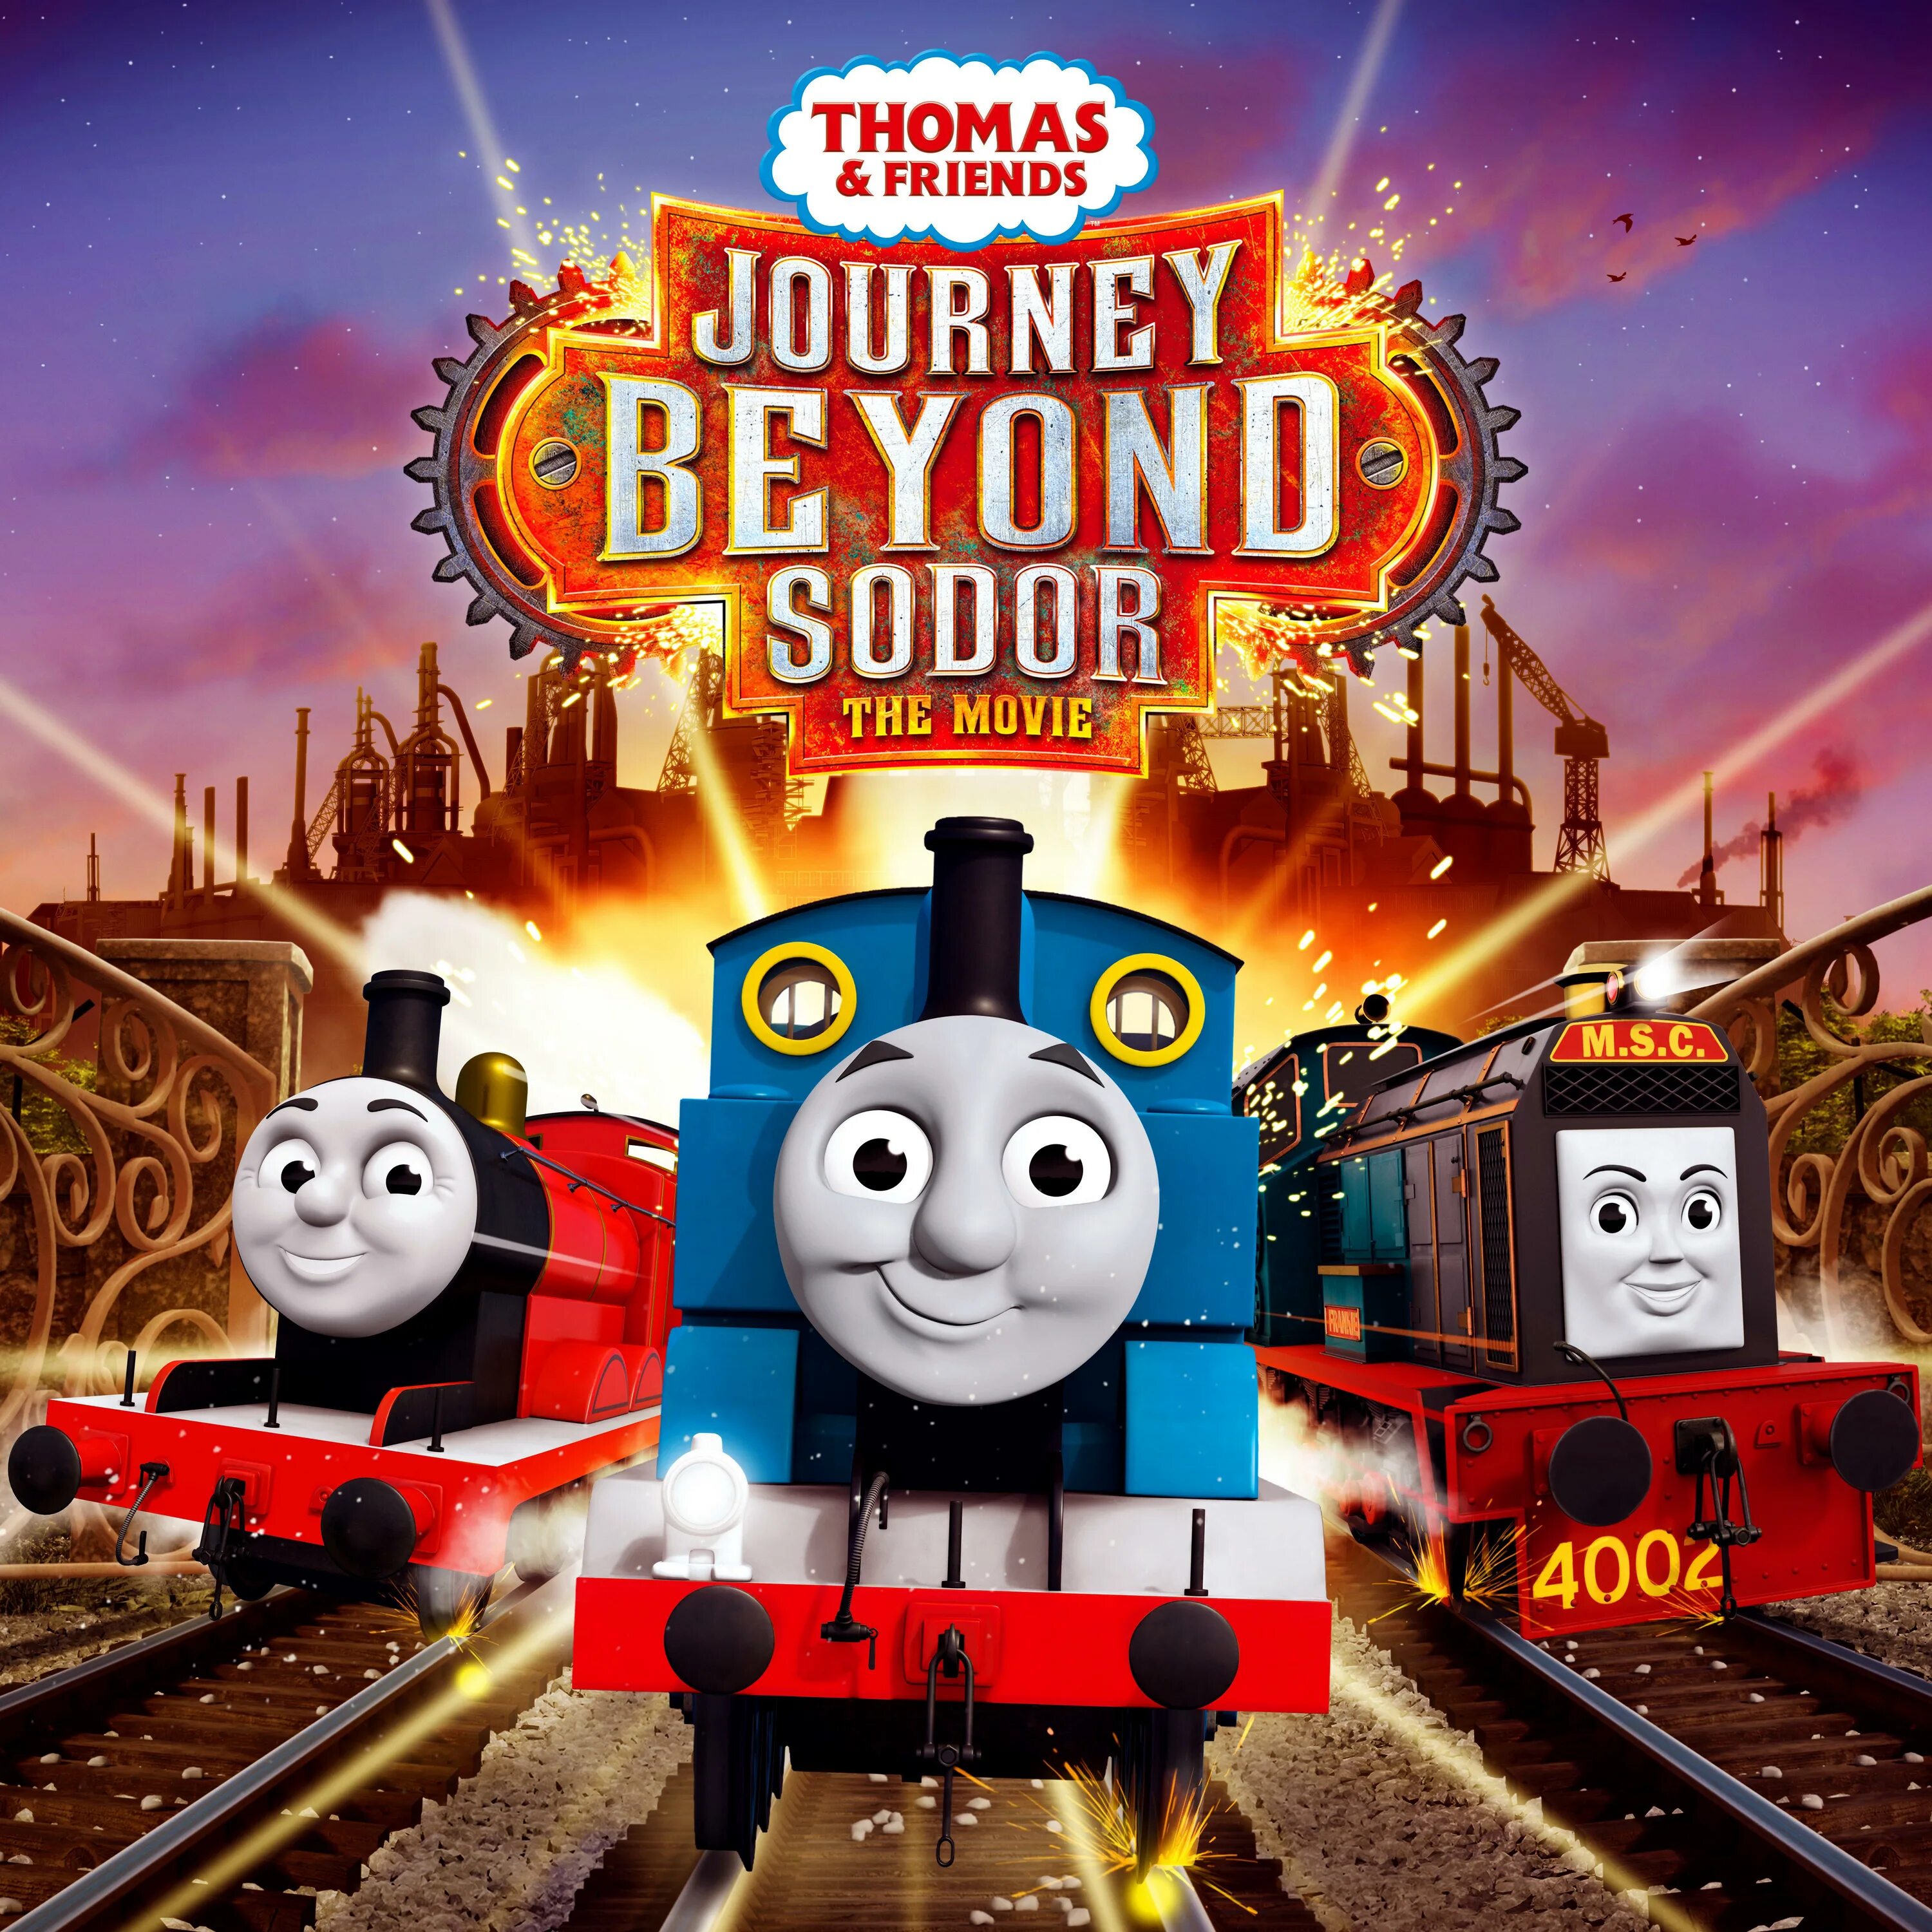 Journey to a friend. Thomas and friends Постер. Sodor реальность?. Thomas and friends around the World. Thomas and friends Journey Beyond Sodor 2017.